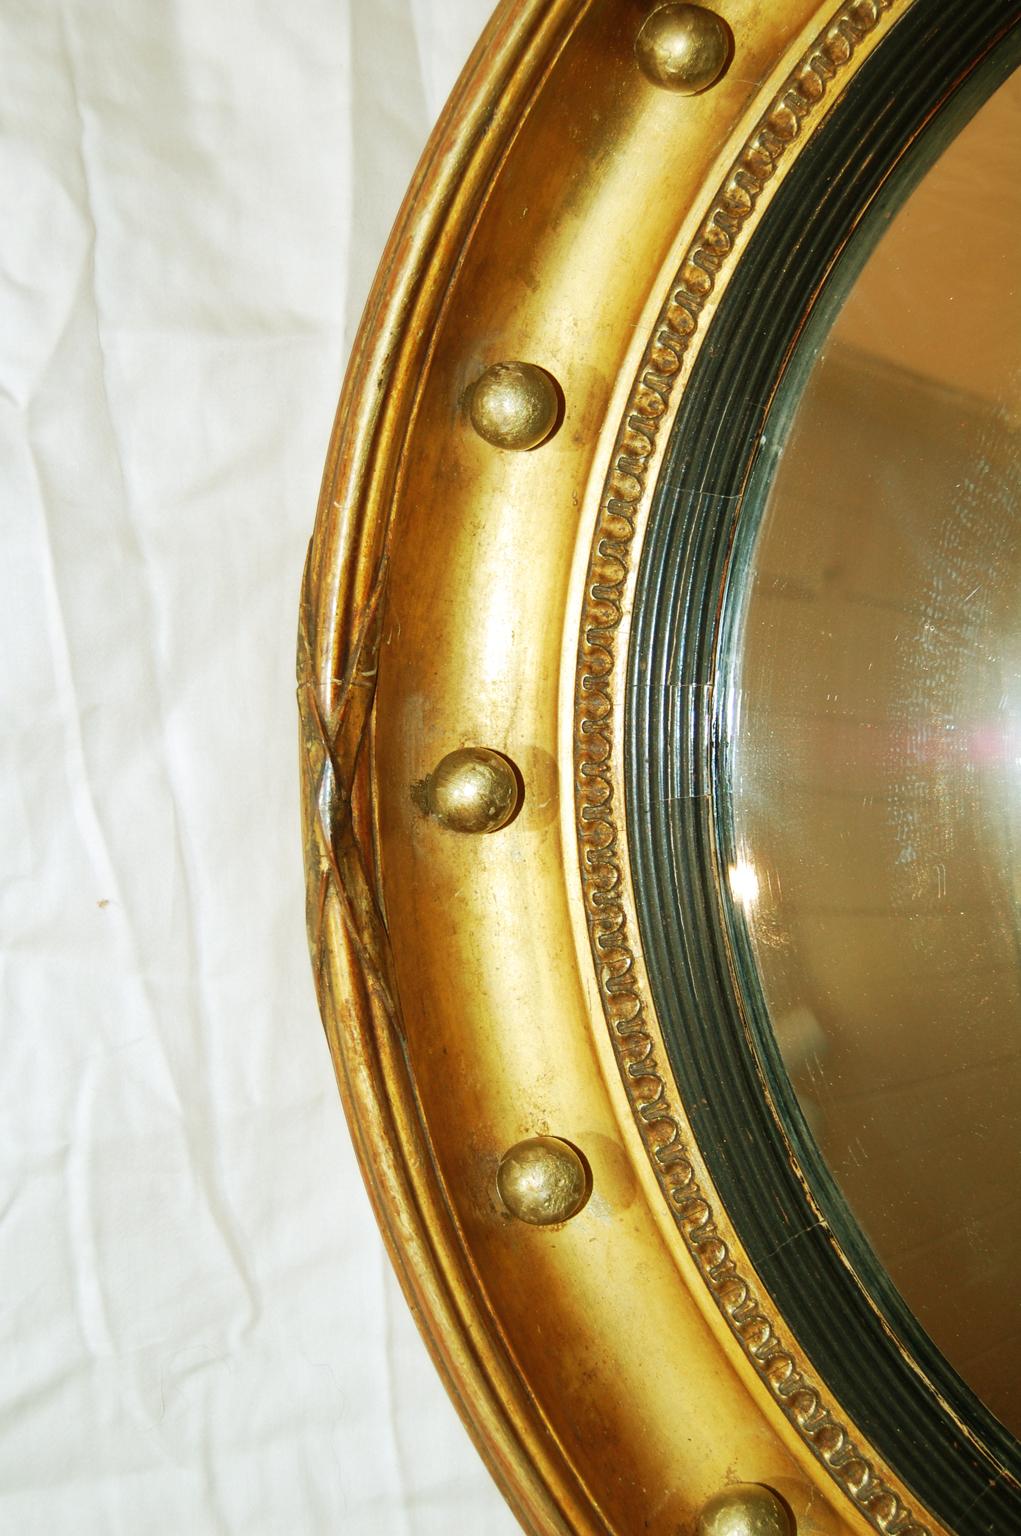 English Regency Style Giltwood convex mirror with black reeded liner, carved, gesso and gilded frame, and gold balls in the deep cove of the frame. The carved reeded edge of the mirror is echoed in the black liner, circa 1850.